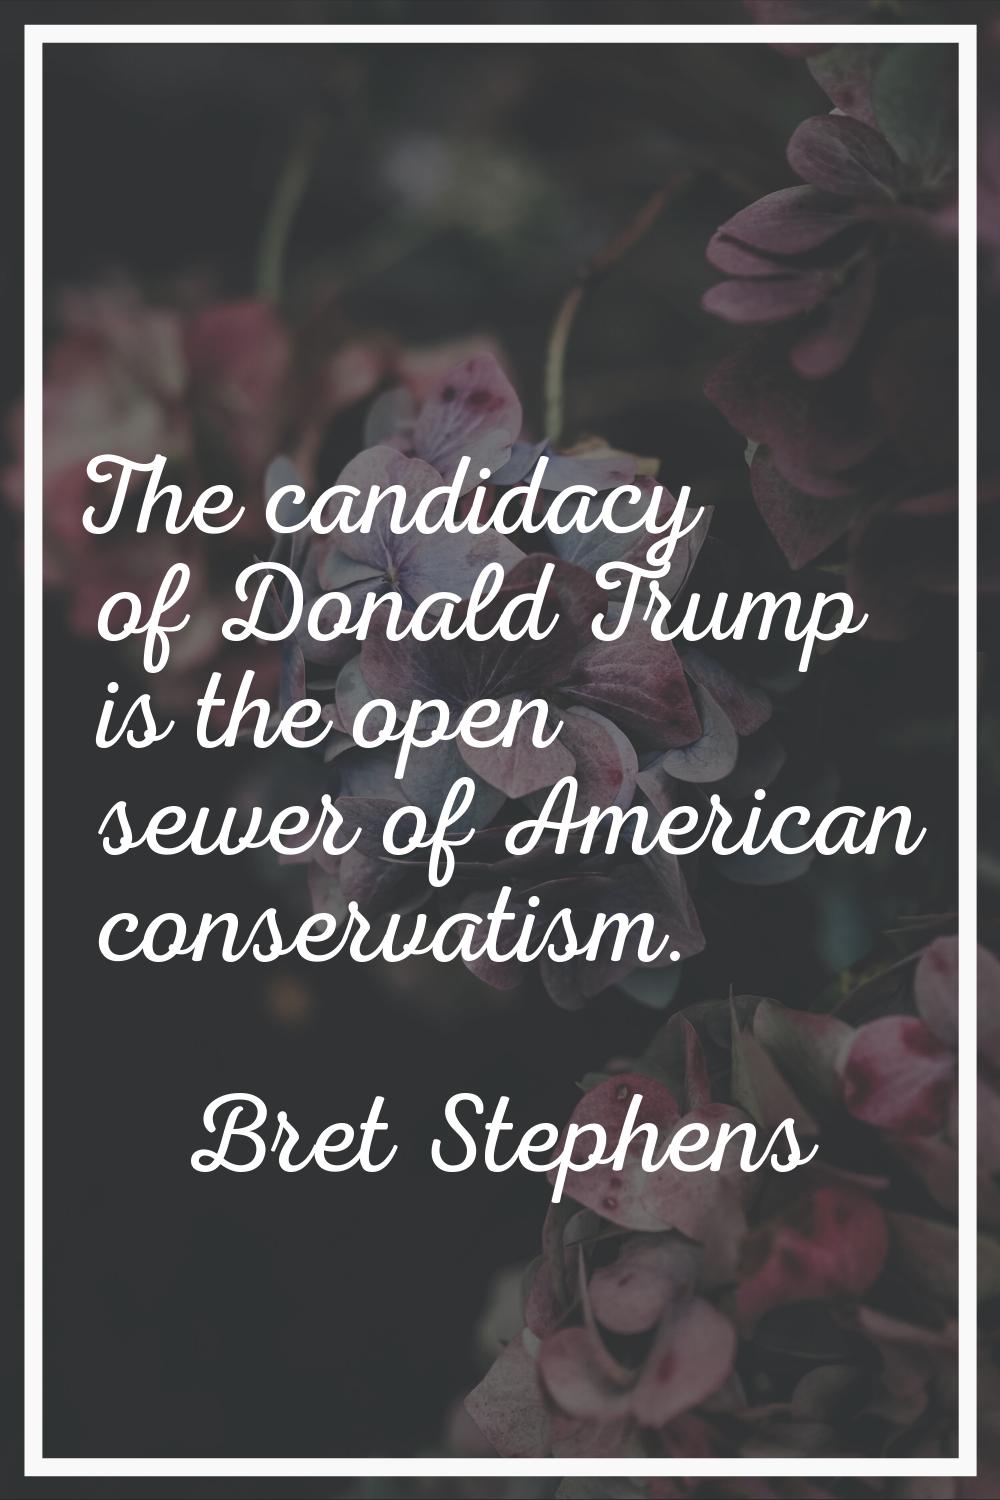 The candidacy of Donald Trump is the open sewer of American conservatism.